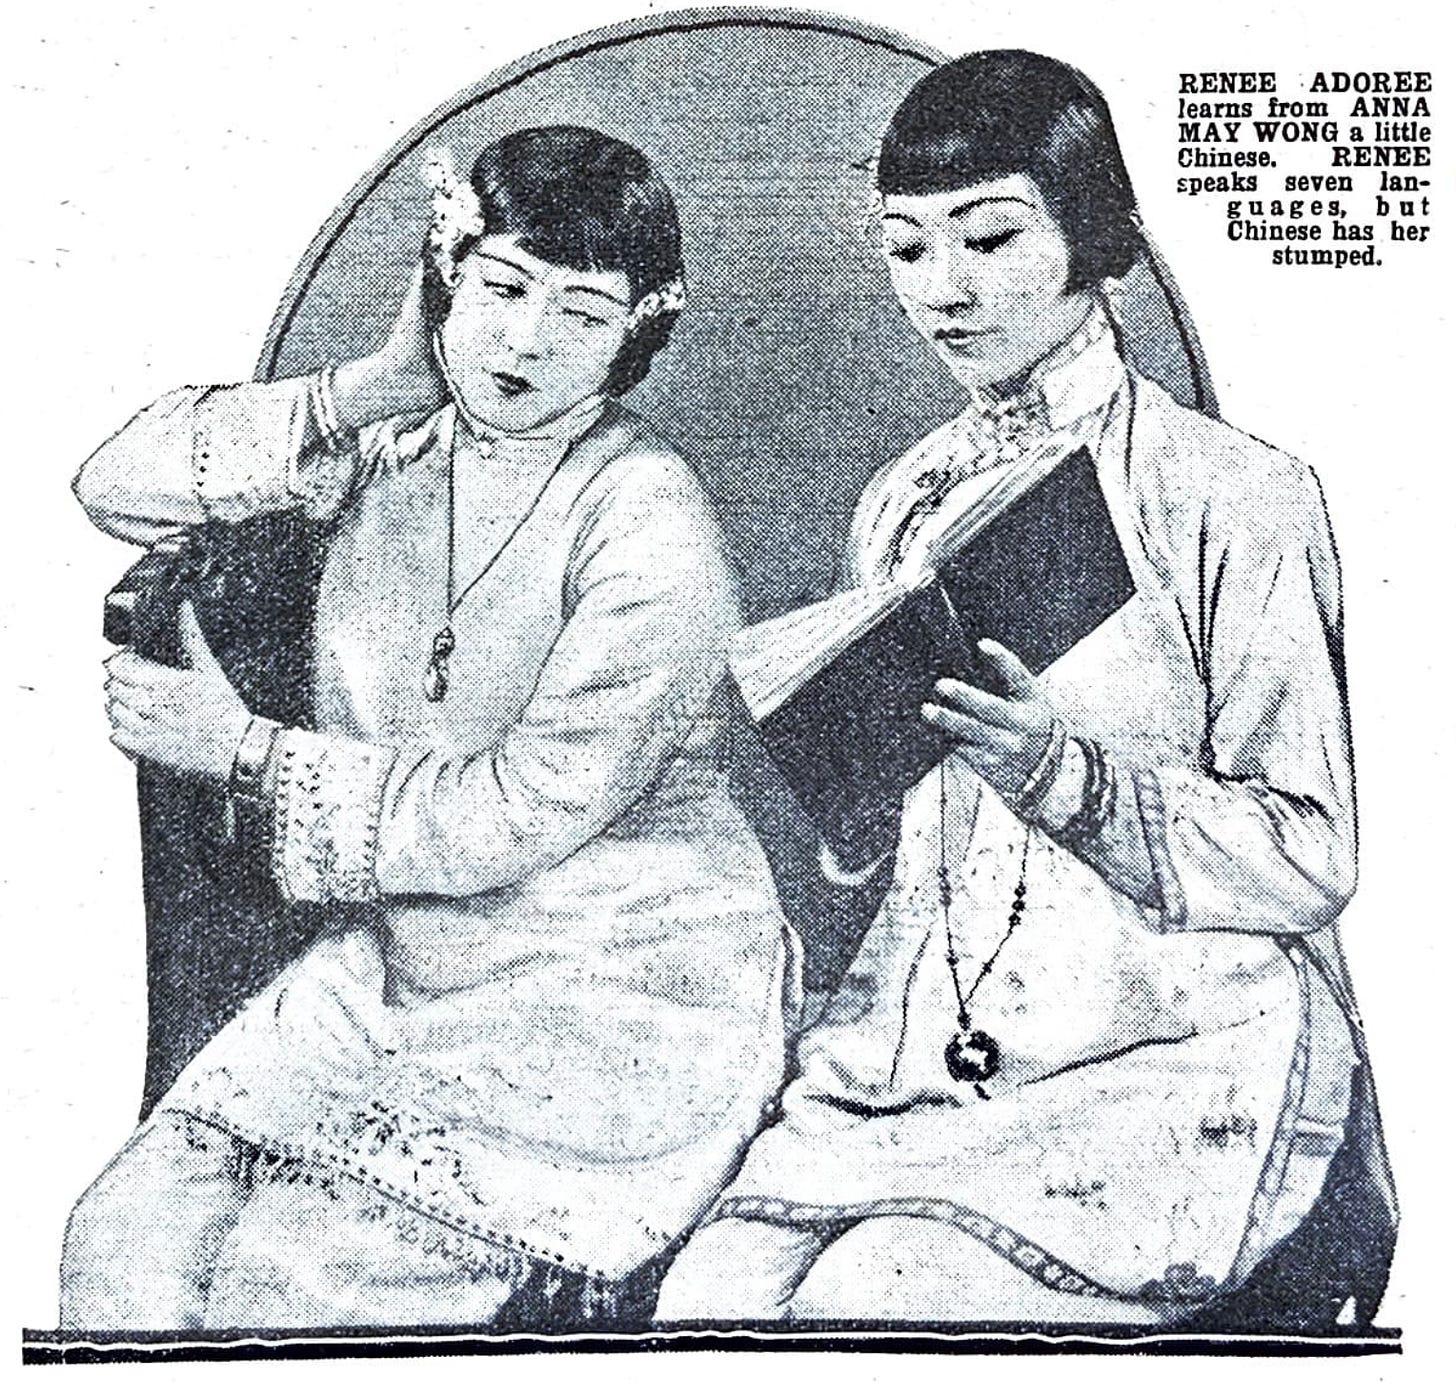 caption on clipping says: "Renee Adoree learns from Anna May Wong a little Chinese." The actresses are in Chinese dress and sit next to each other as AMW holds a book open.